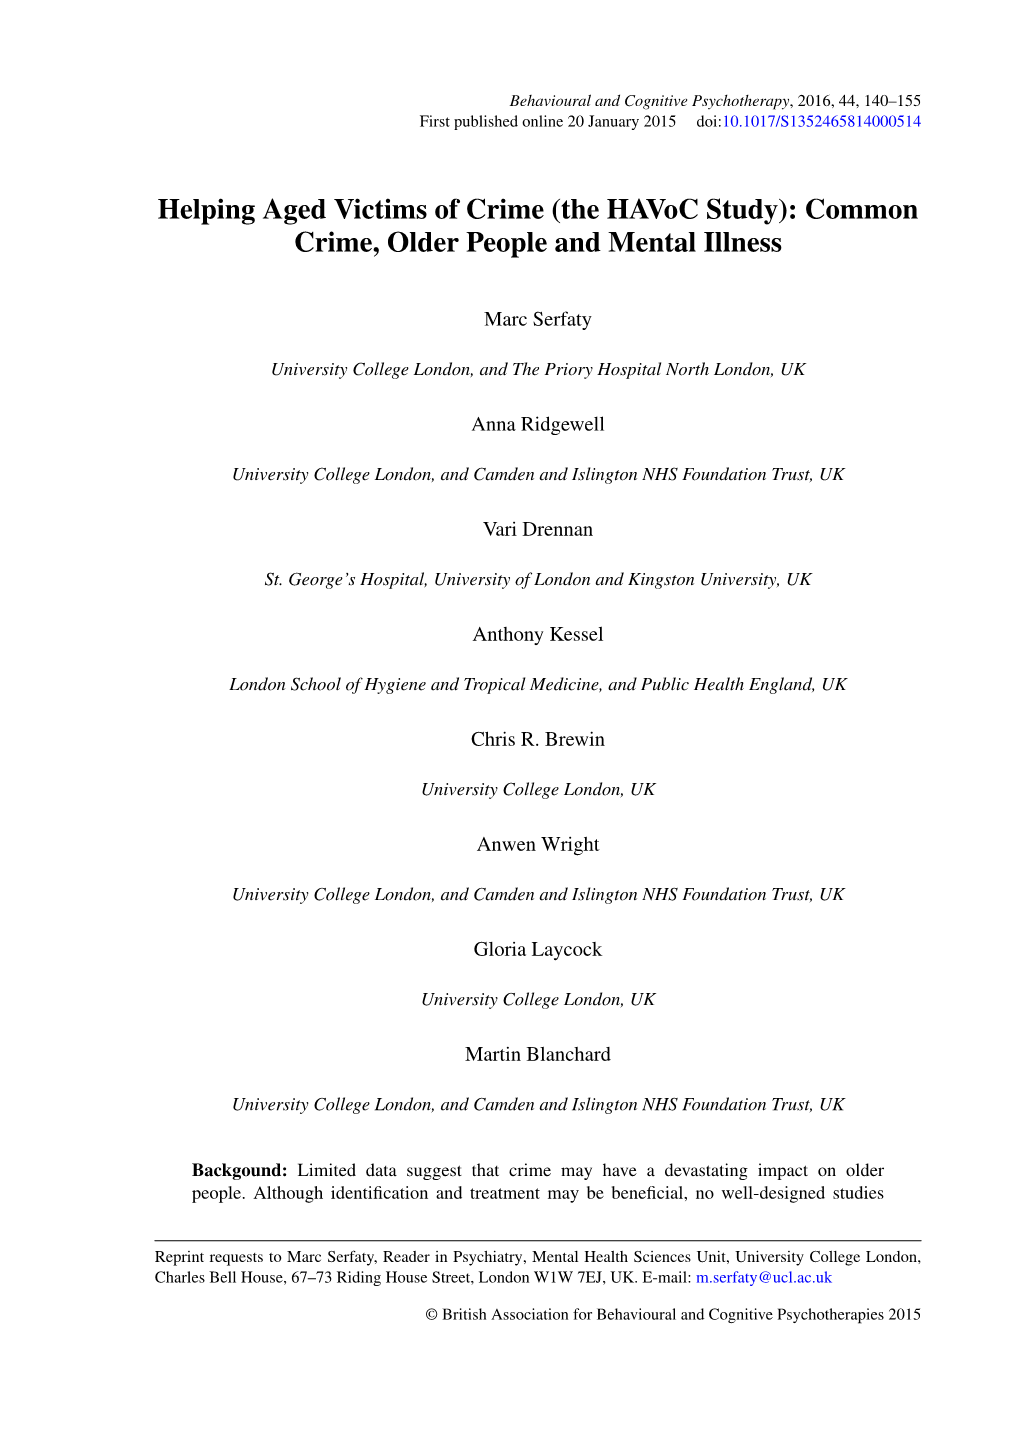 Helping Aged Victims of Crime (The Havoc Study): Common Crime, Older People and Mental Illness